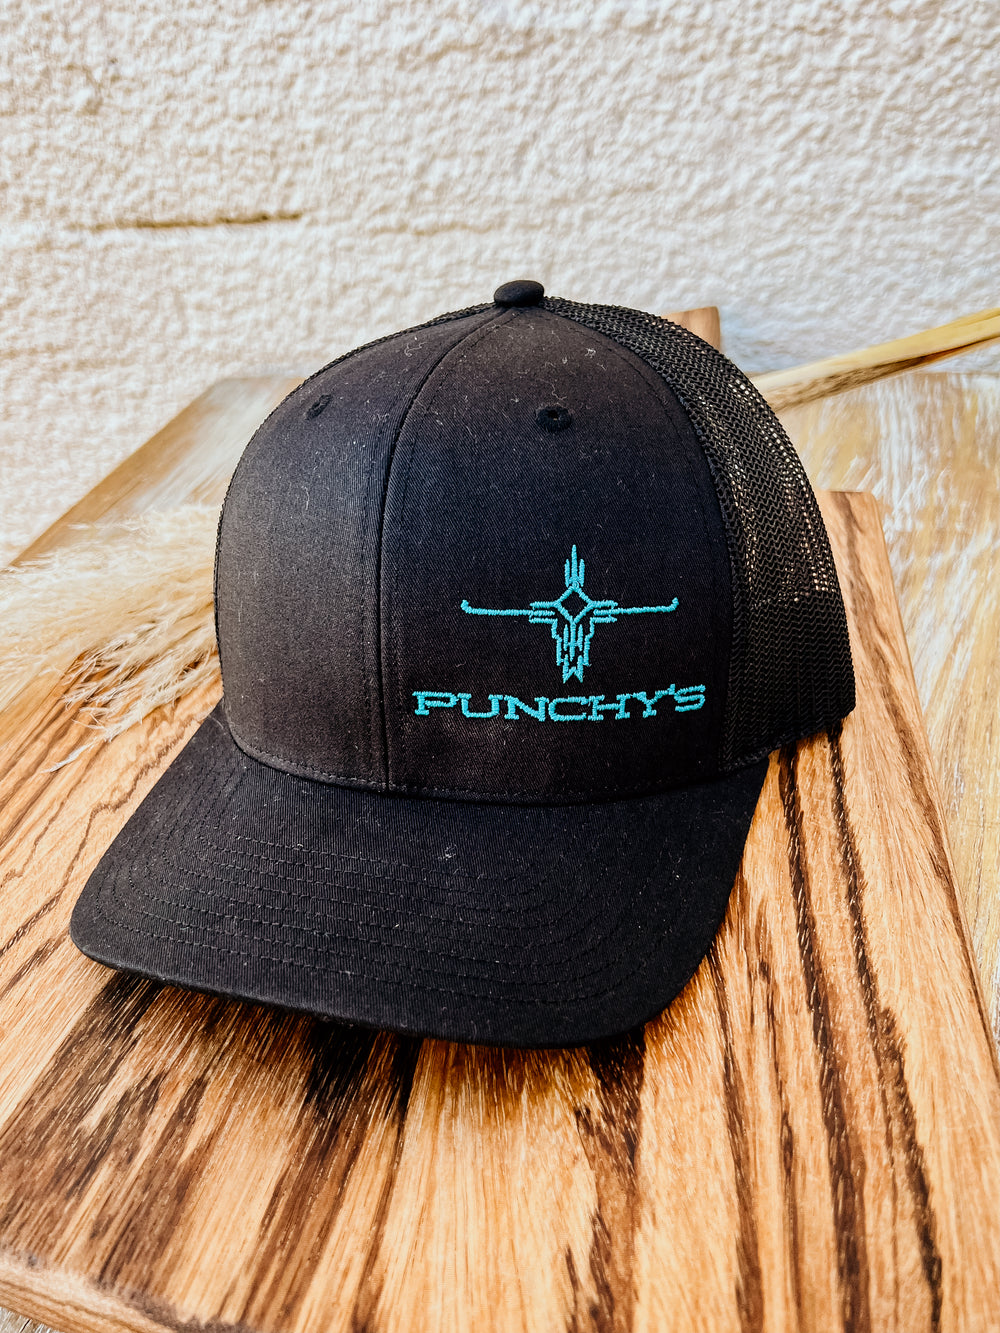 Punchy's Trucker Caps Black/Black with Turquoise Embroidery